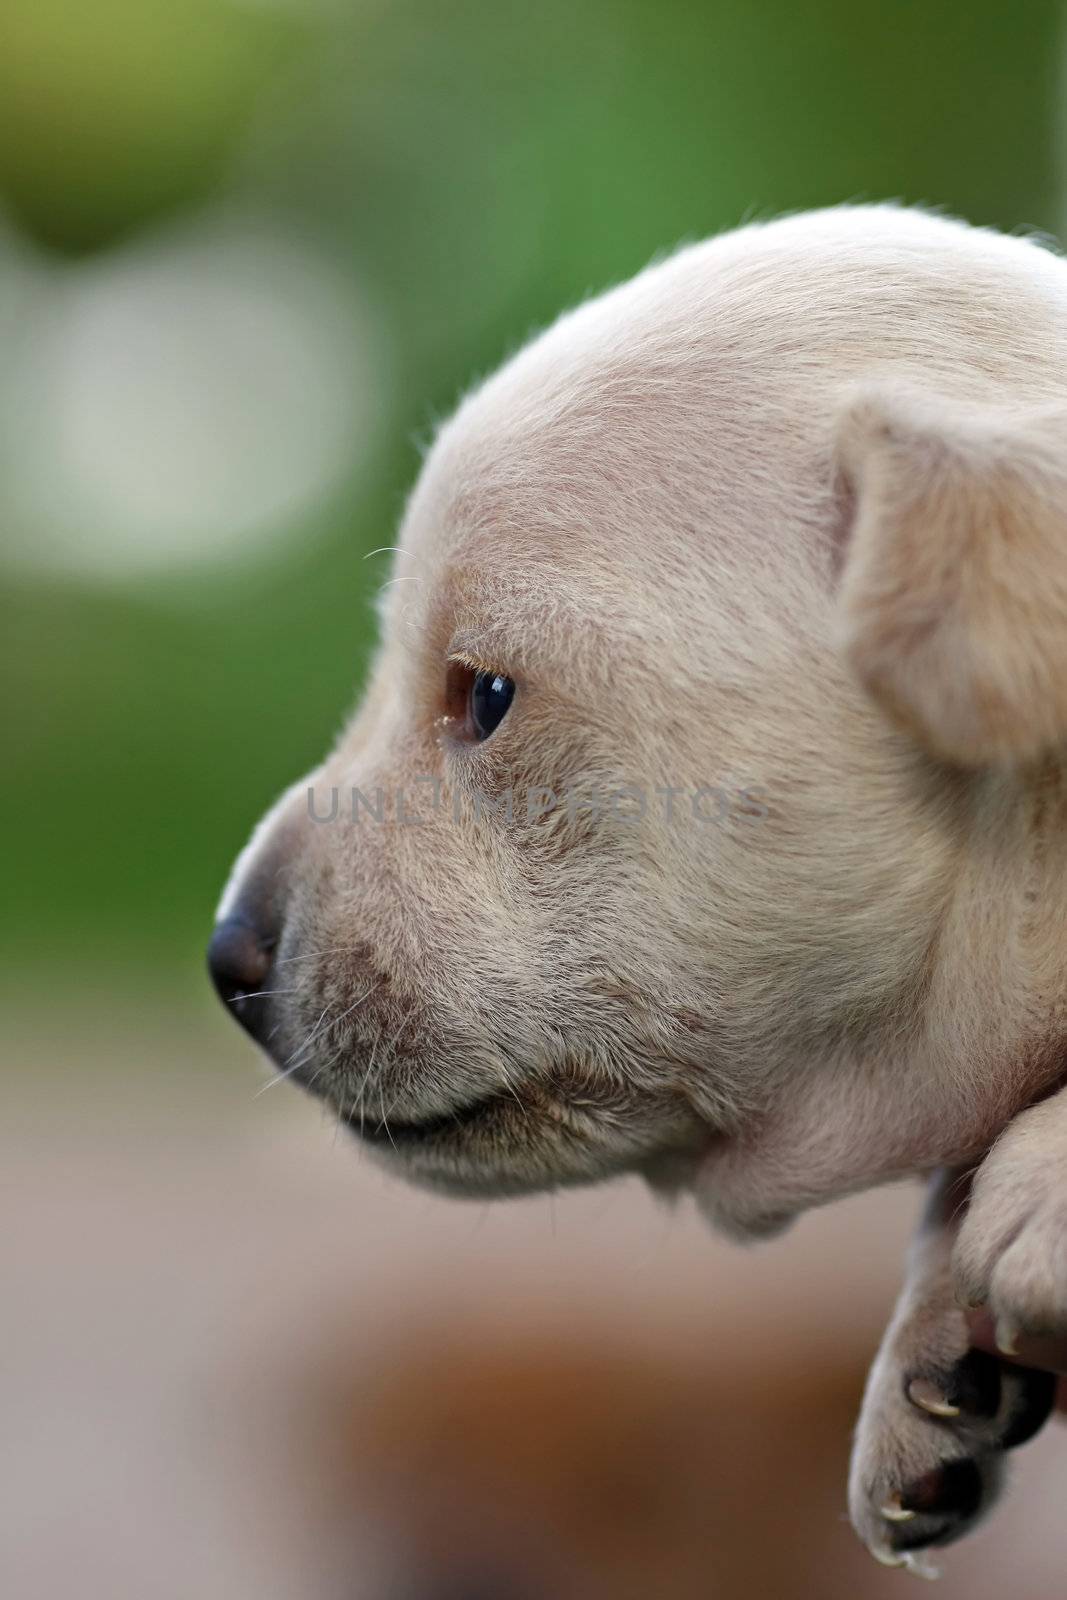 Closeup view of a very young puppy.